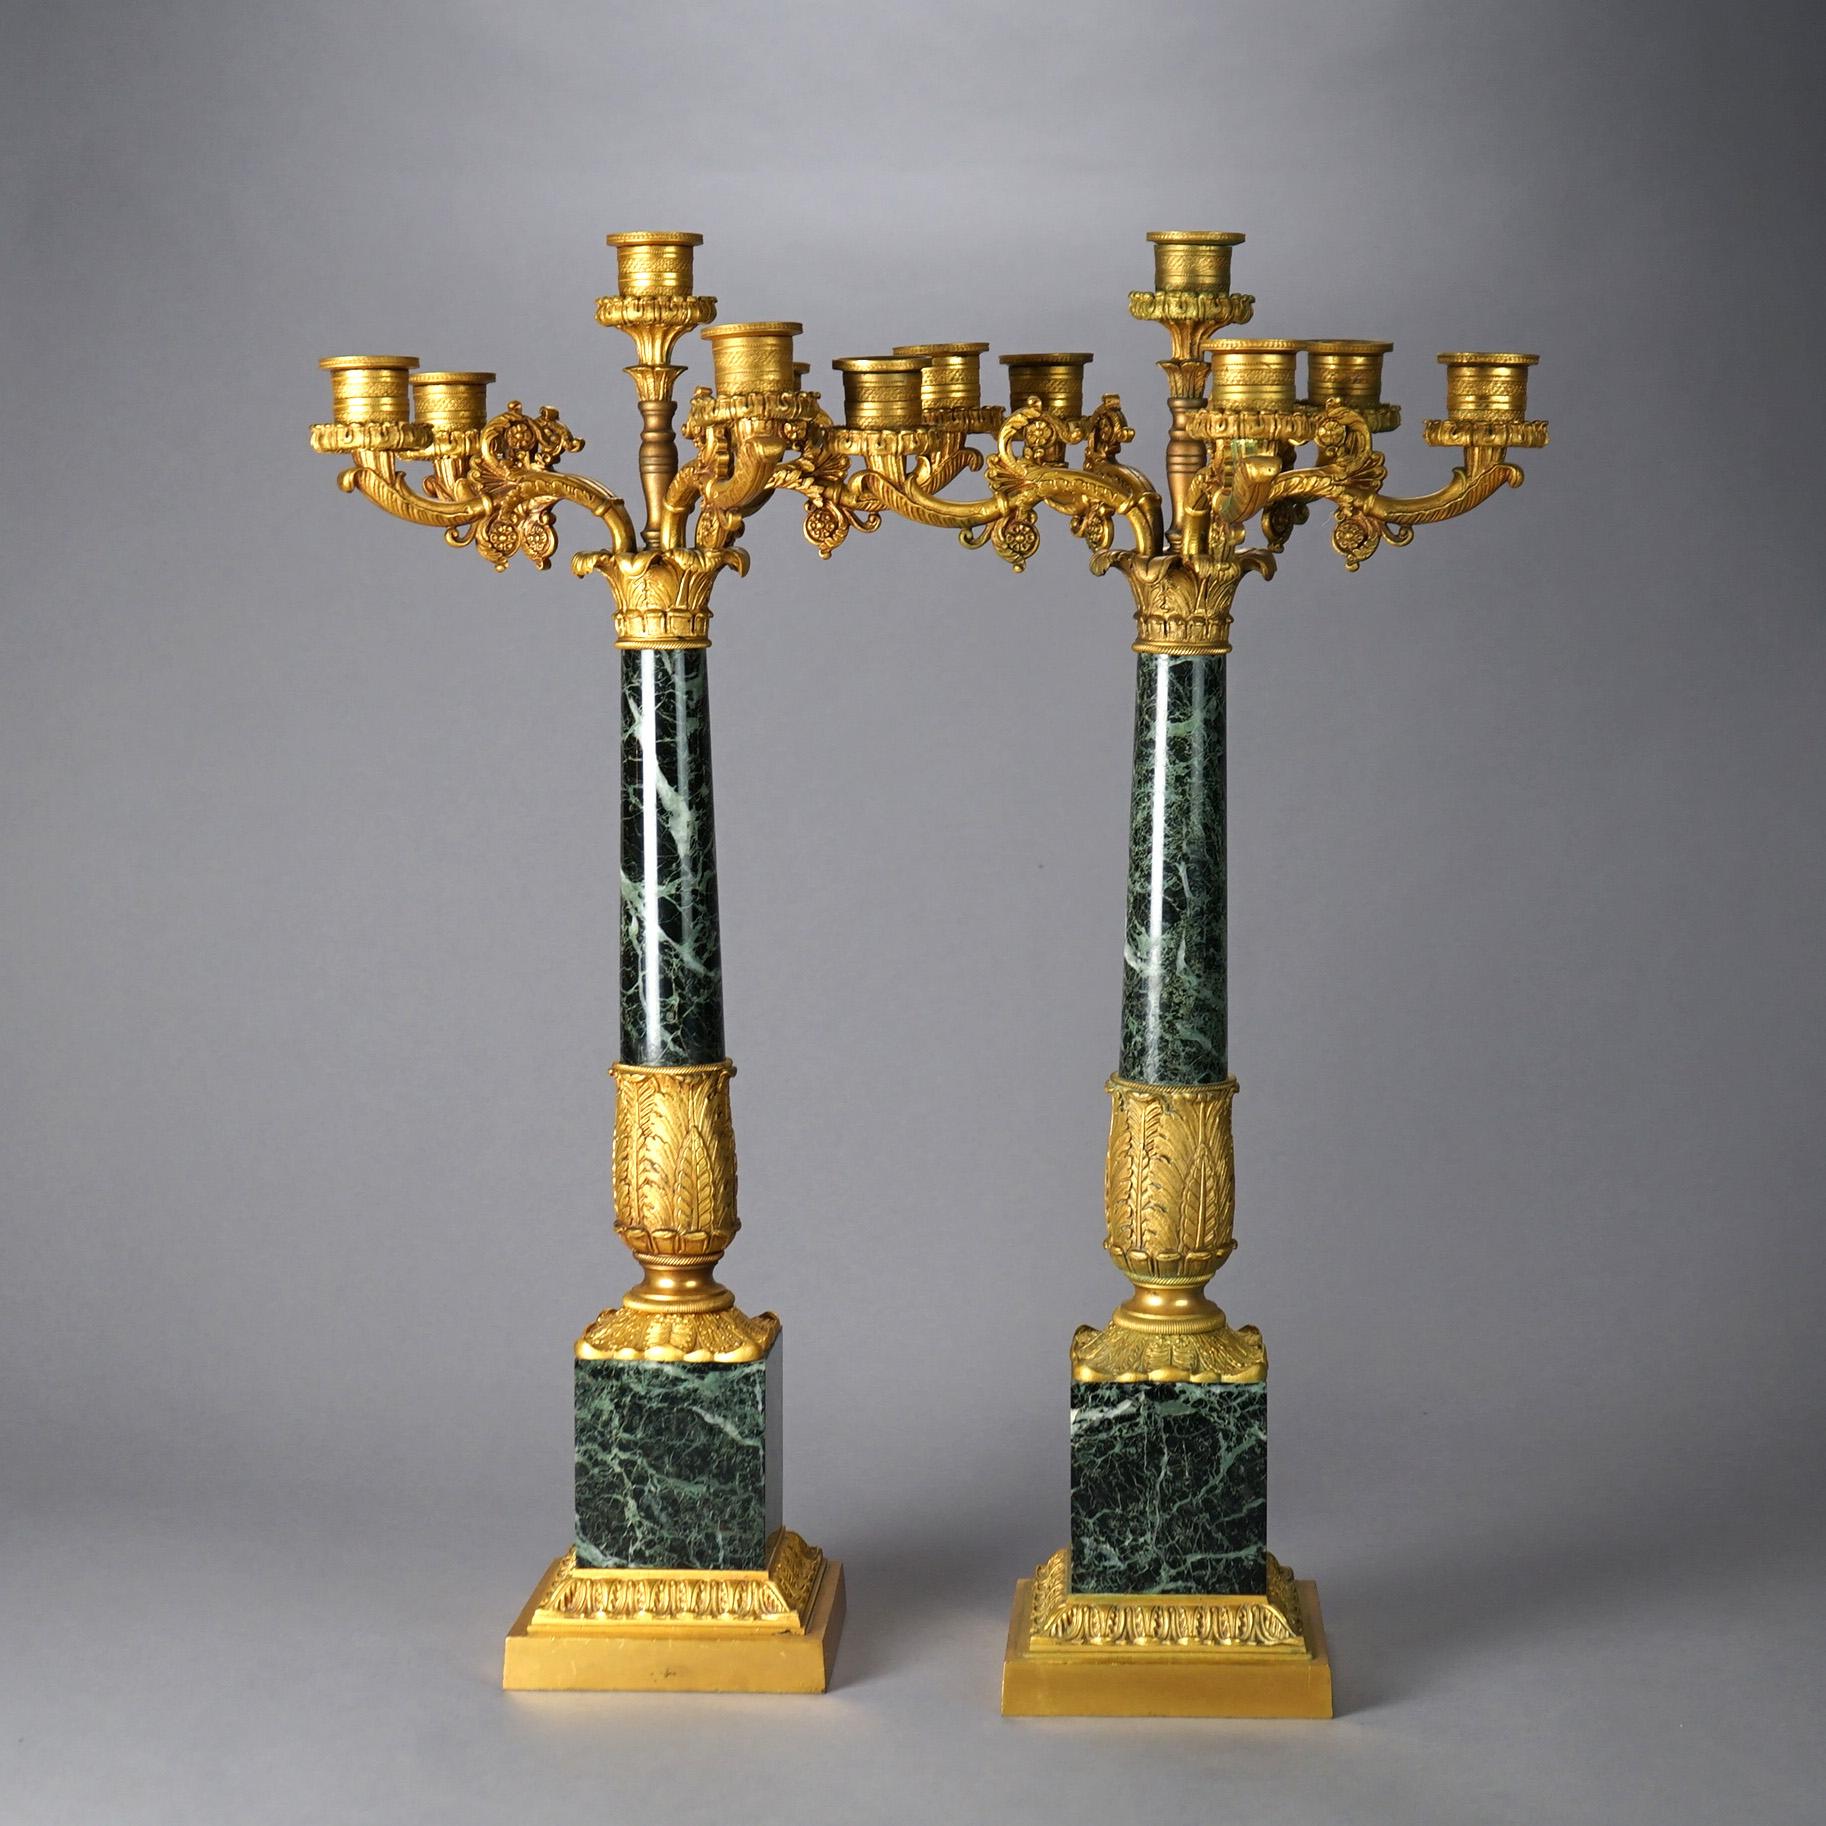 An antique pair of French Empire candelabra offer gilt bronze arms over marble columns, 19th century.


Measure - 26.75